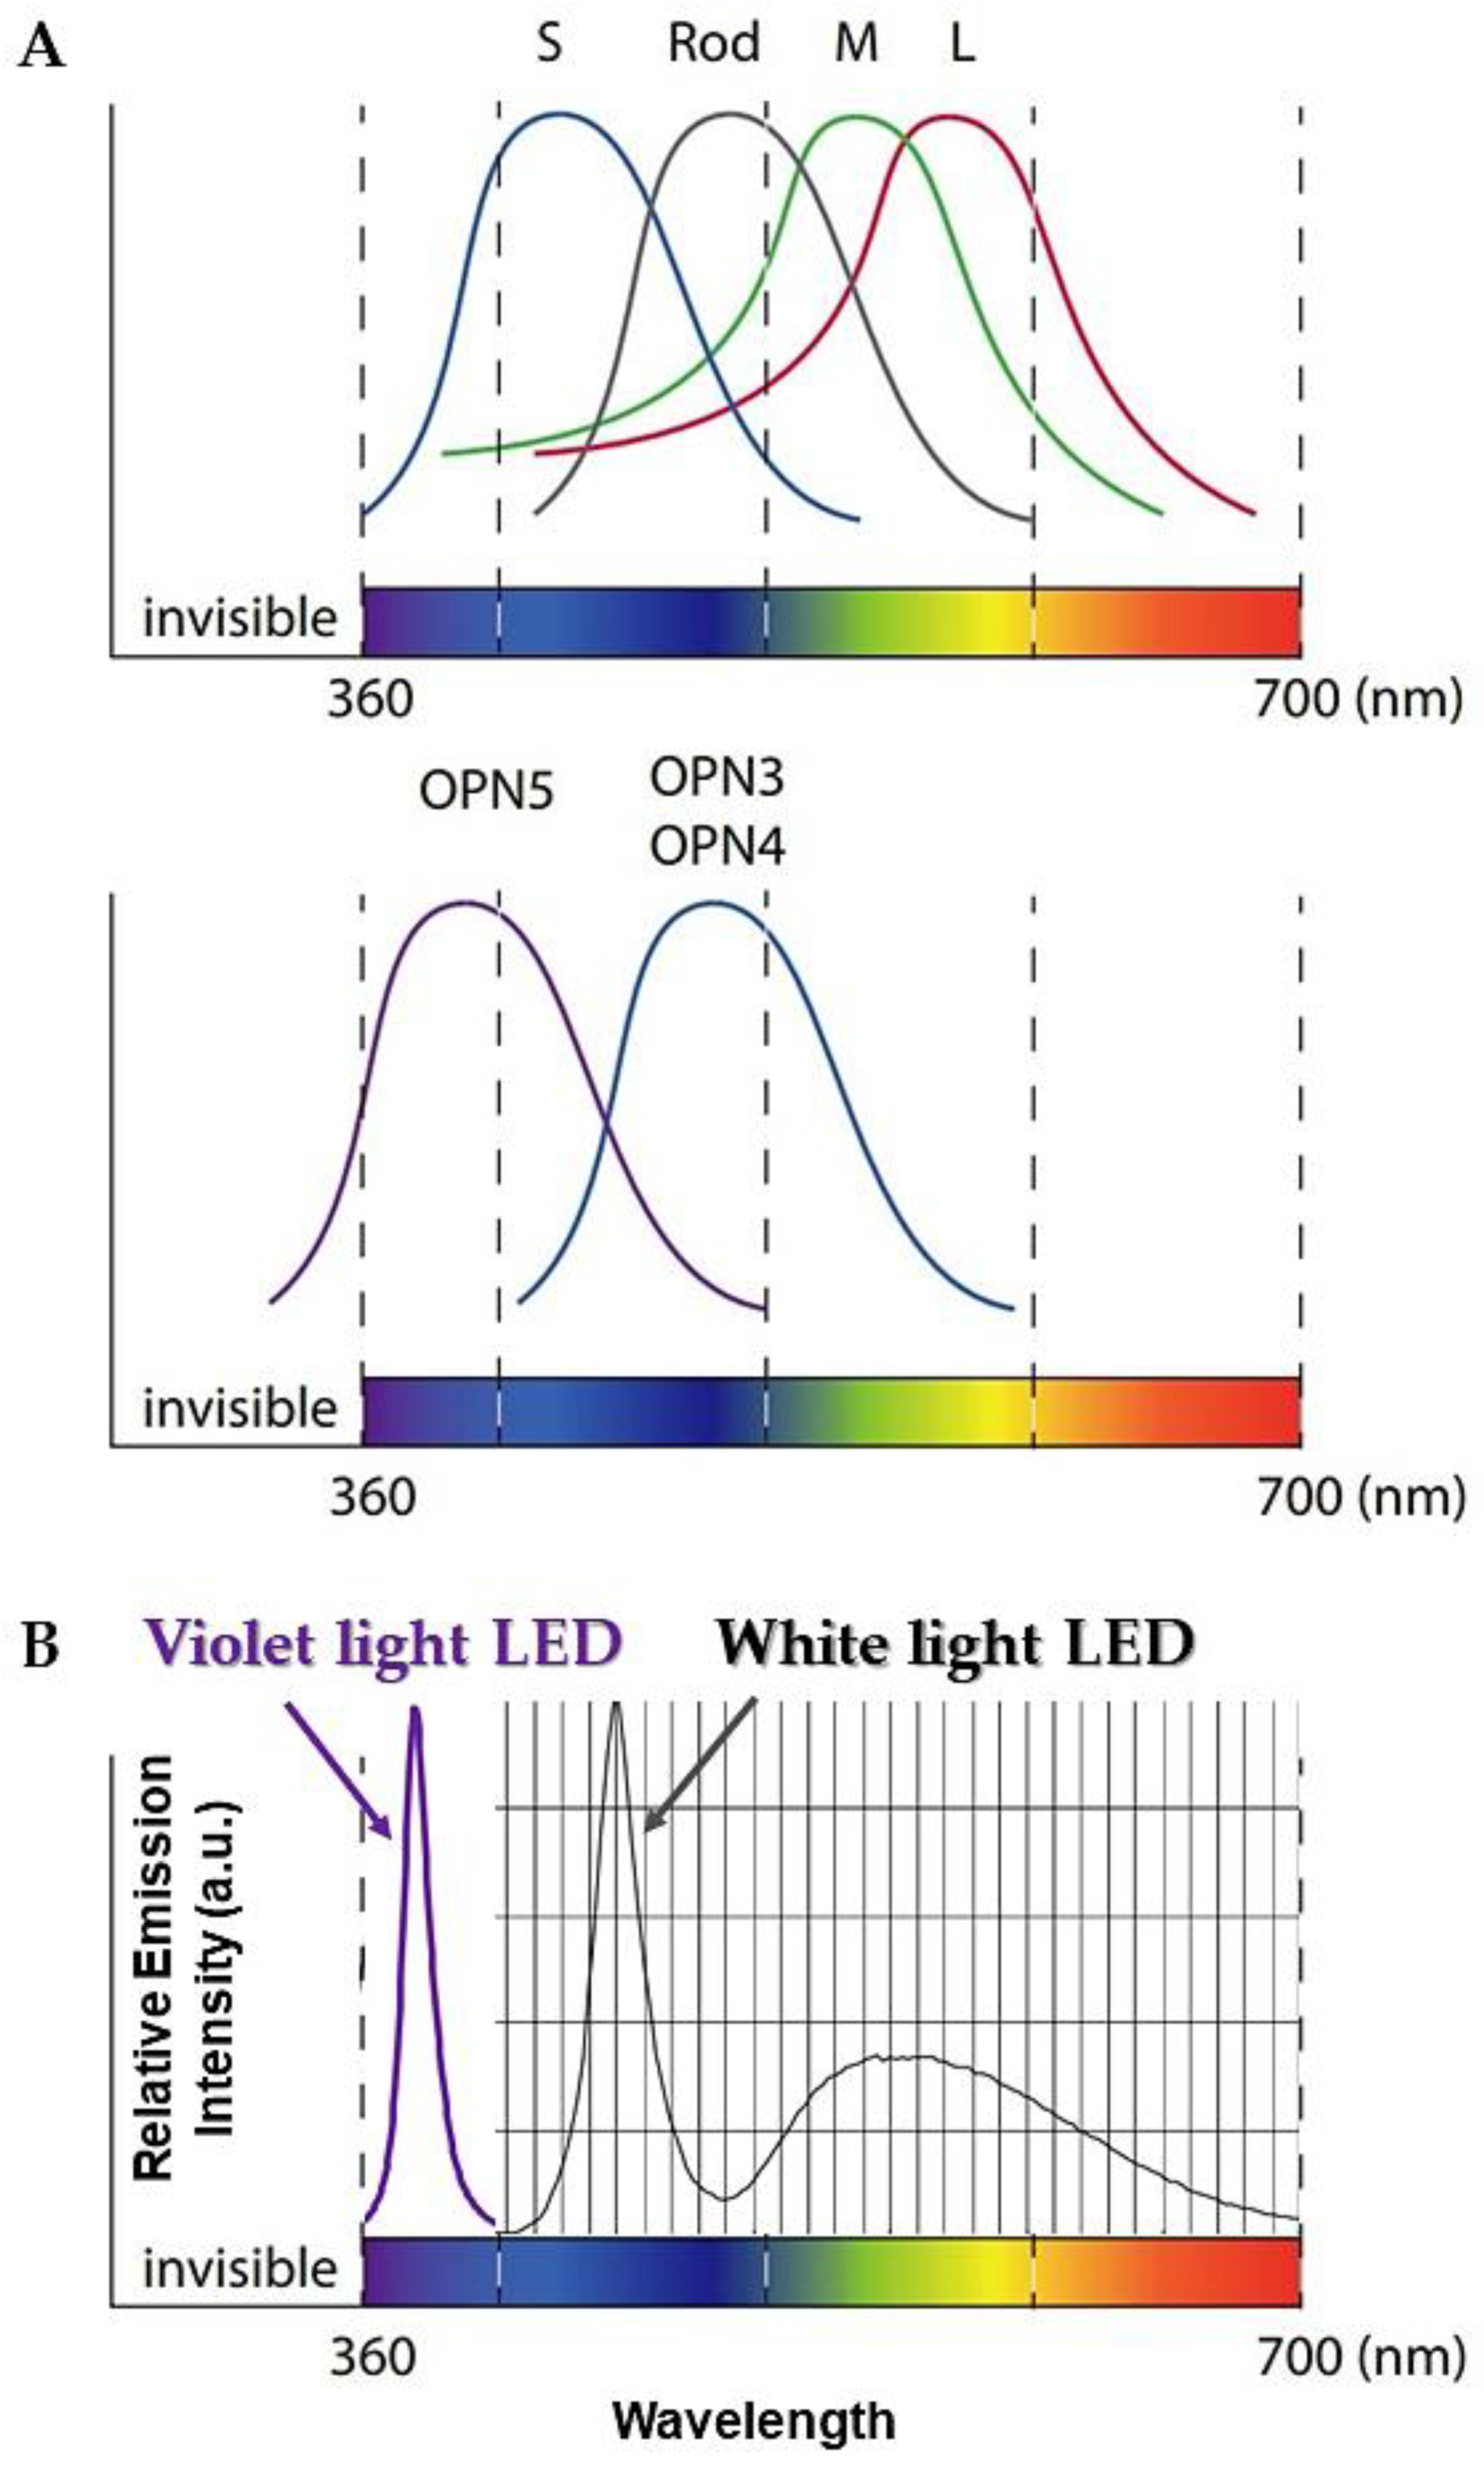 JPM | Free Full-Text | Photobiological Neuromodulation of Resting-State EEG  and Steady-State Visual-Evoked Potentials by 40 Hz Violet Light Optical  Stimulation in Healthy Individuals